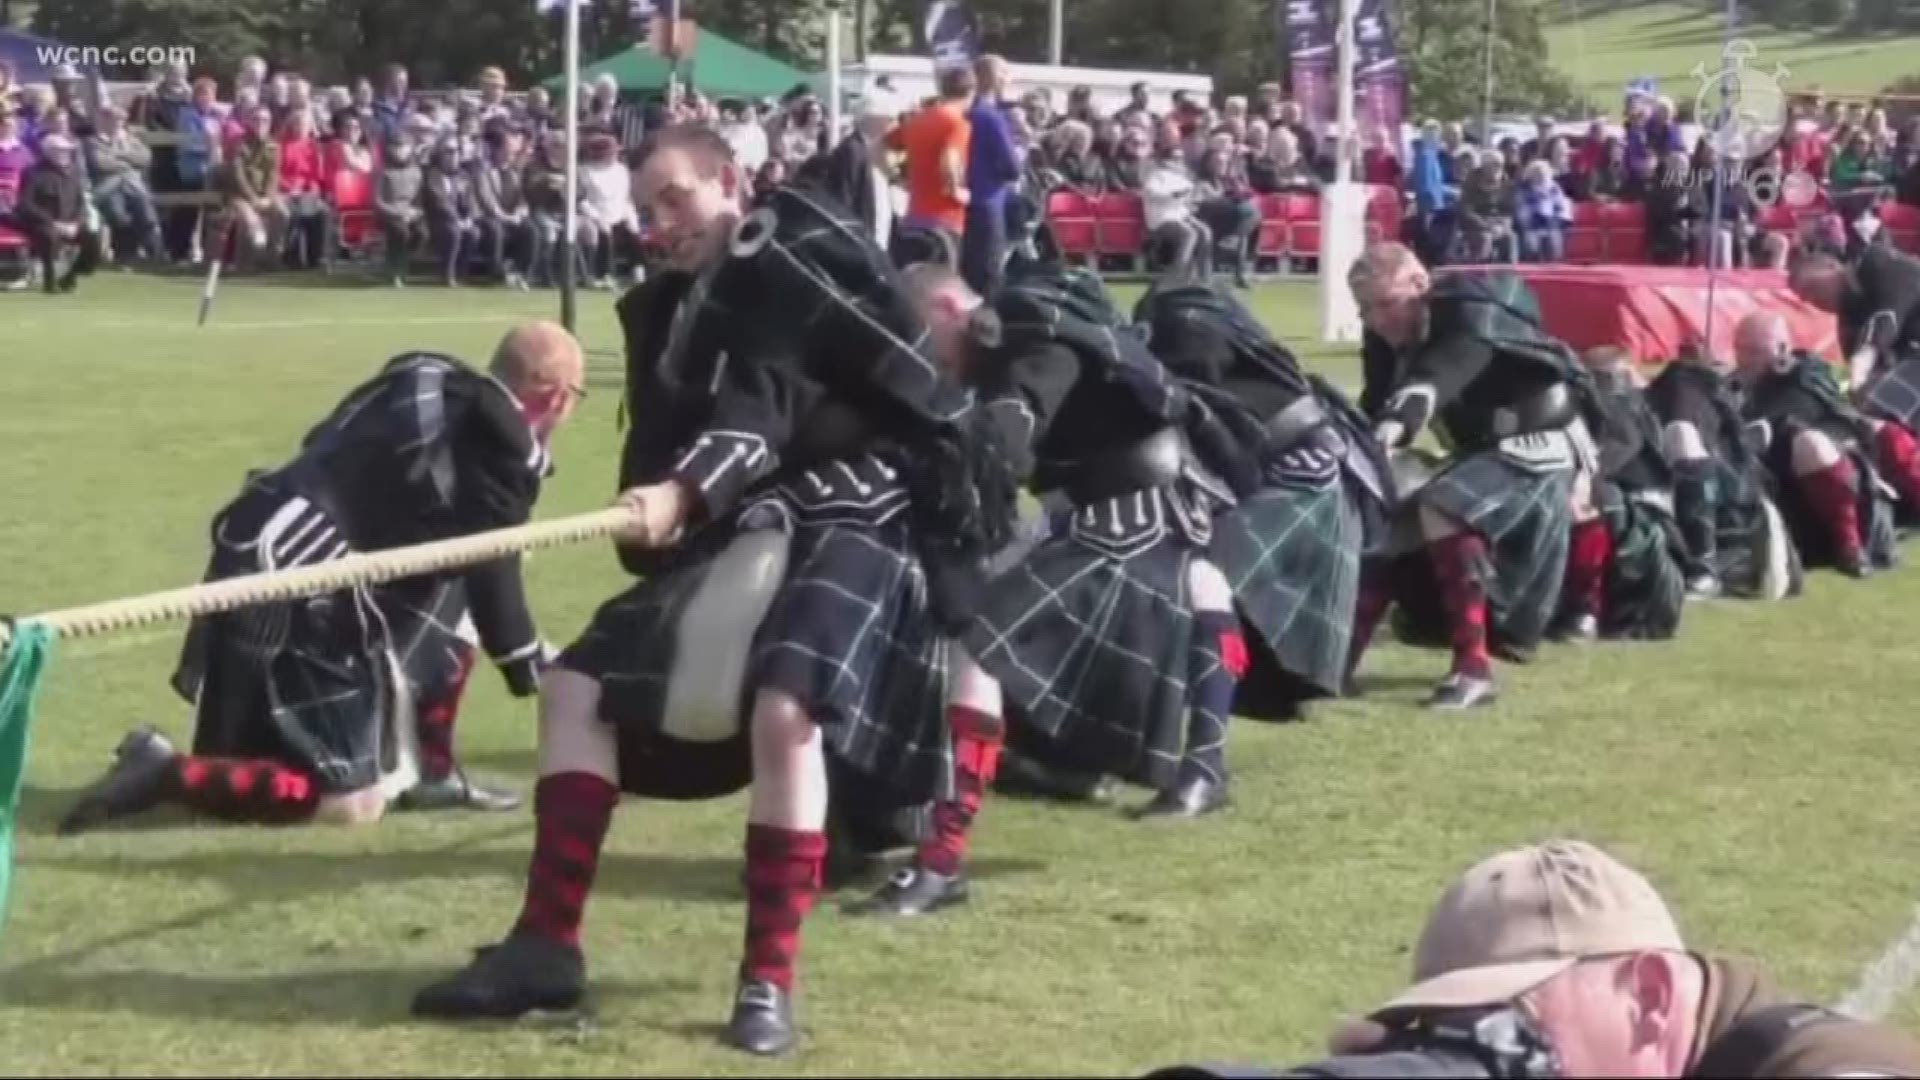 Starting Friday, Grandfather Mountain will play host to the 64th annual Highland Games. From traditional Scottish foods to games like tug of war, there's plenty of fun for everyone.